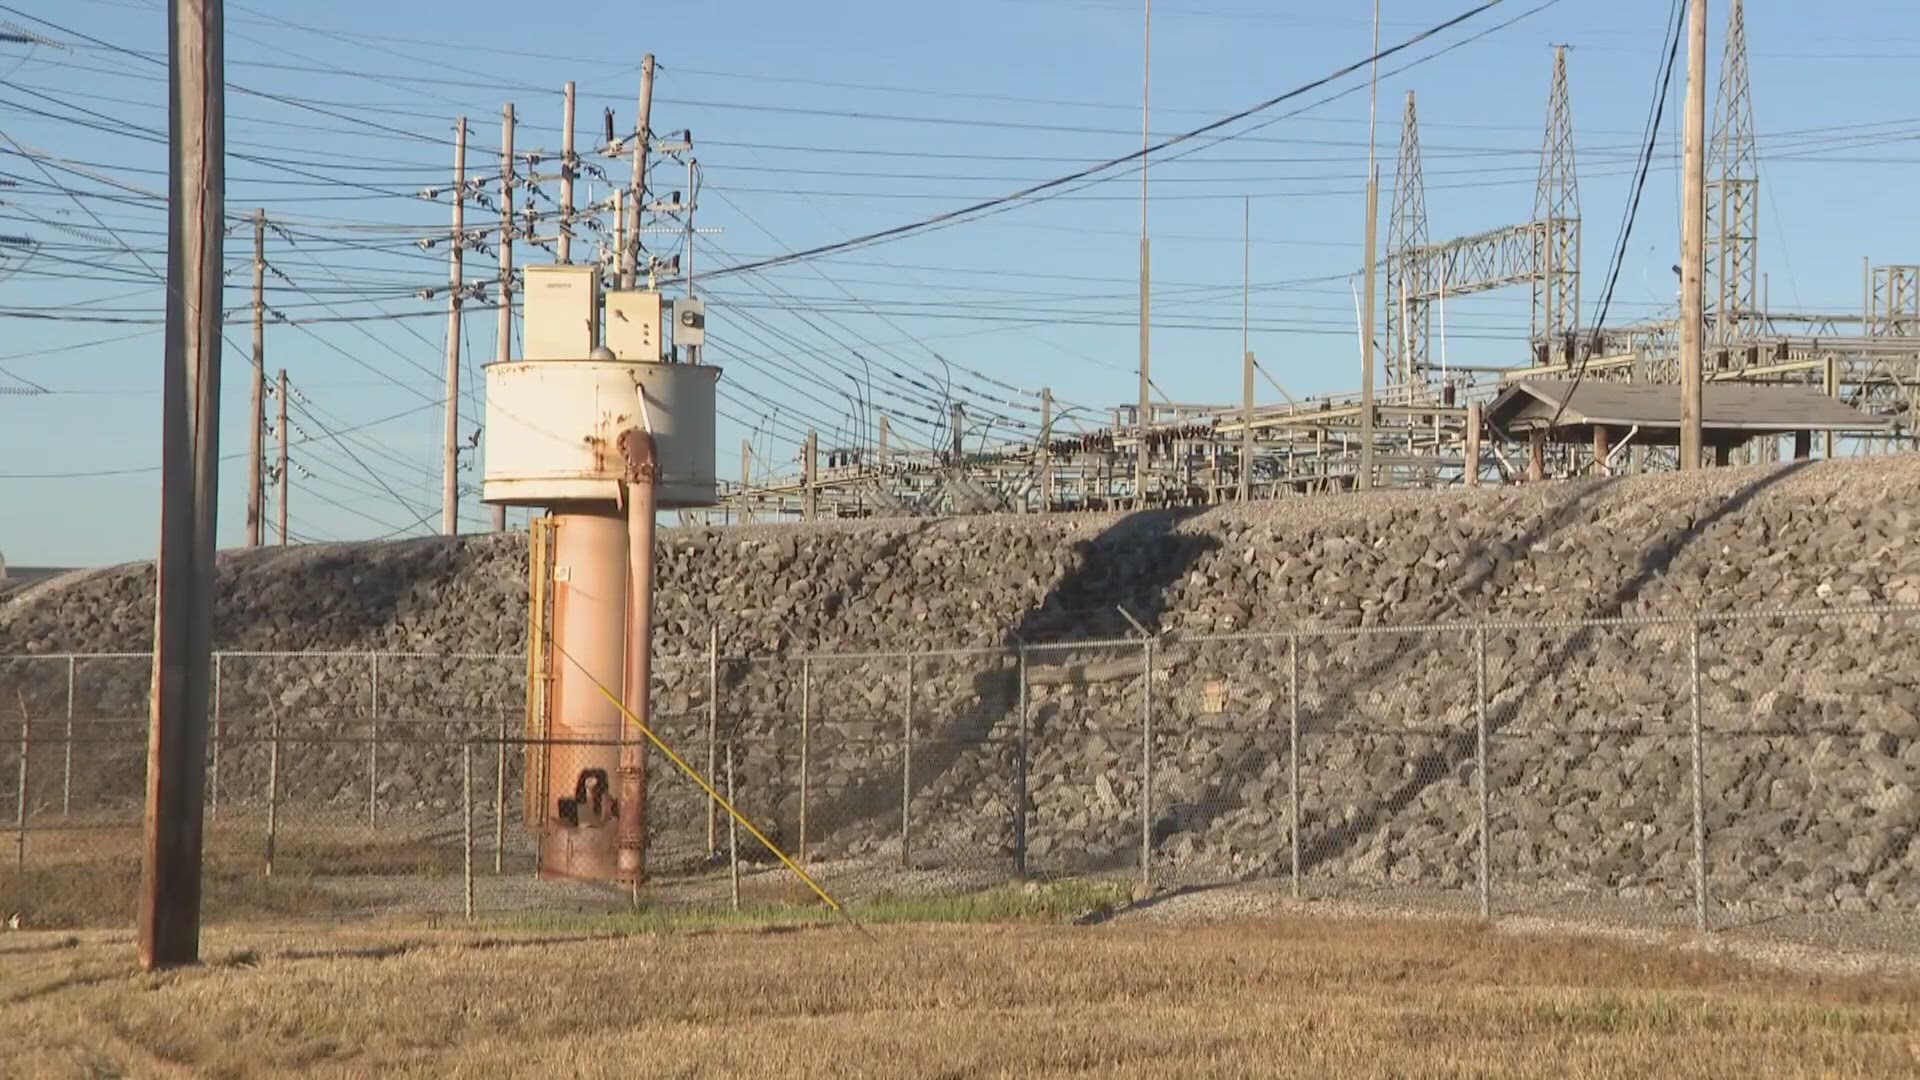 Lawyers said the goal of the lawsuit is to ensure Ameren Missouri pays for the cleanup of the contamination and doesn't pass on the cost to St. Charles residents.